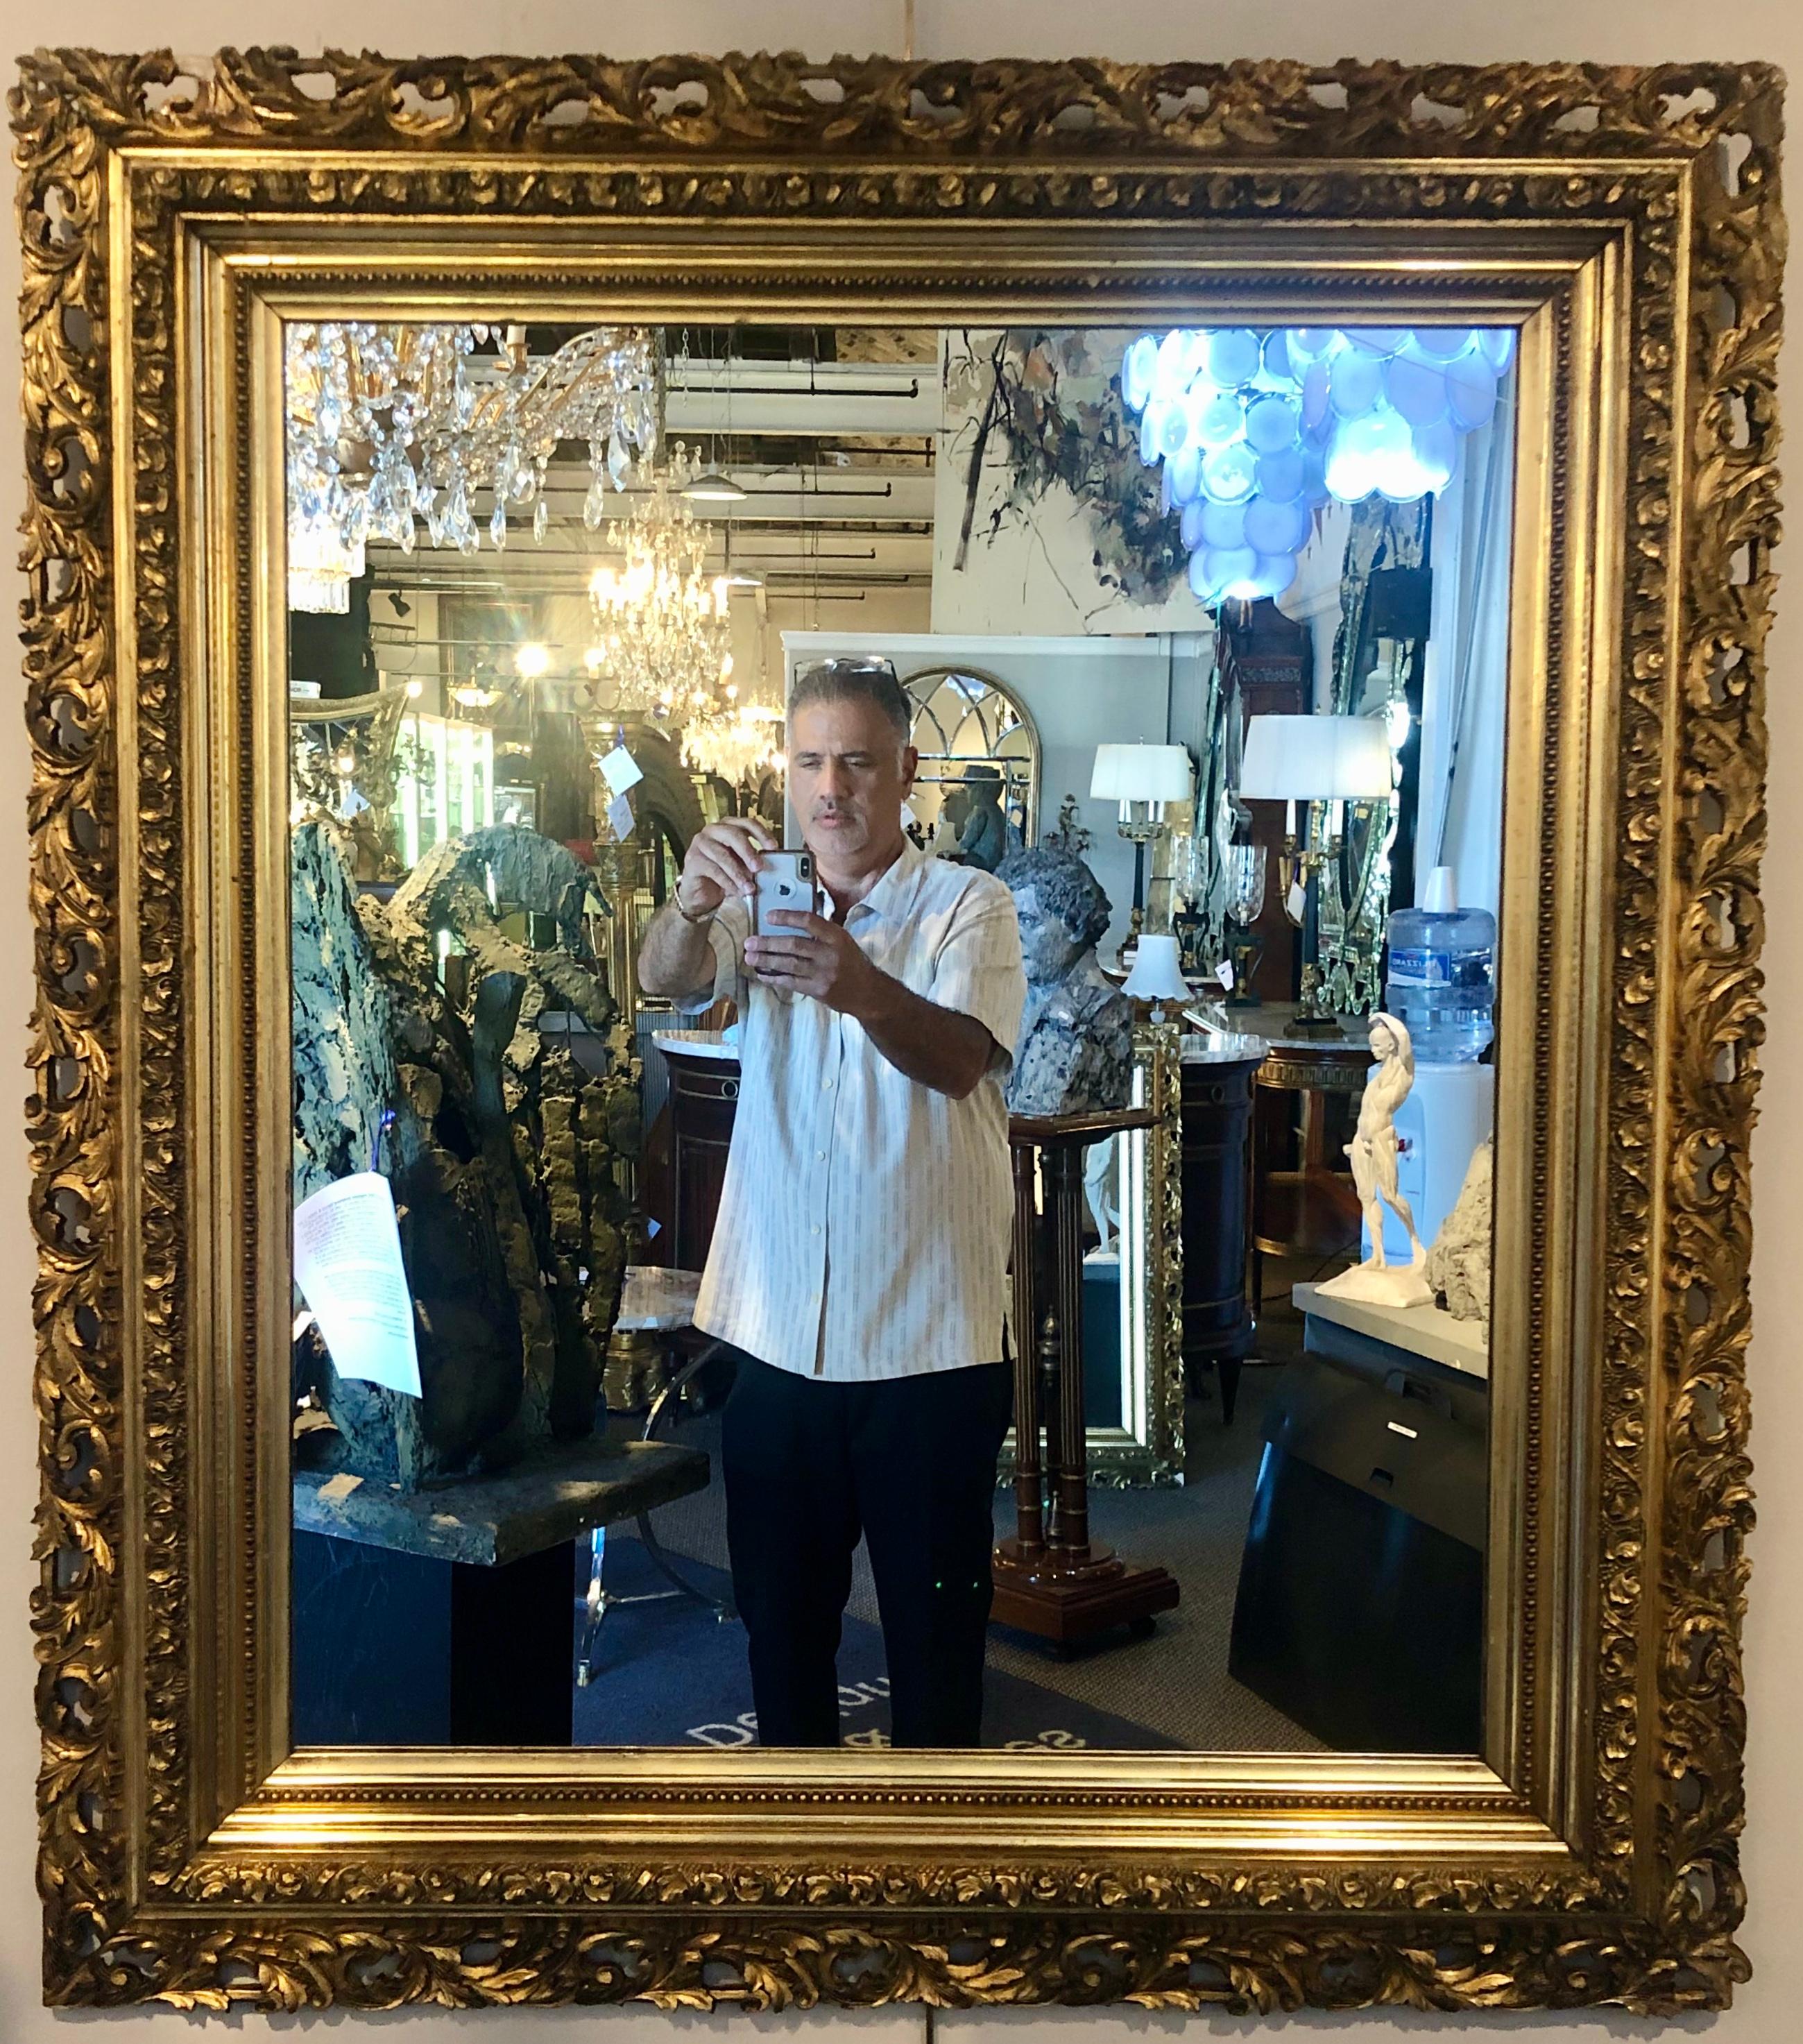 Pair of giltwood late 19th century wall or console mirrors. Each having a clear center mirror framed in a finely carved giltwood pierced carved frame. The six border gilt frame is simply stunning and would make a lovely addition to any home setting.